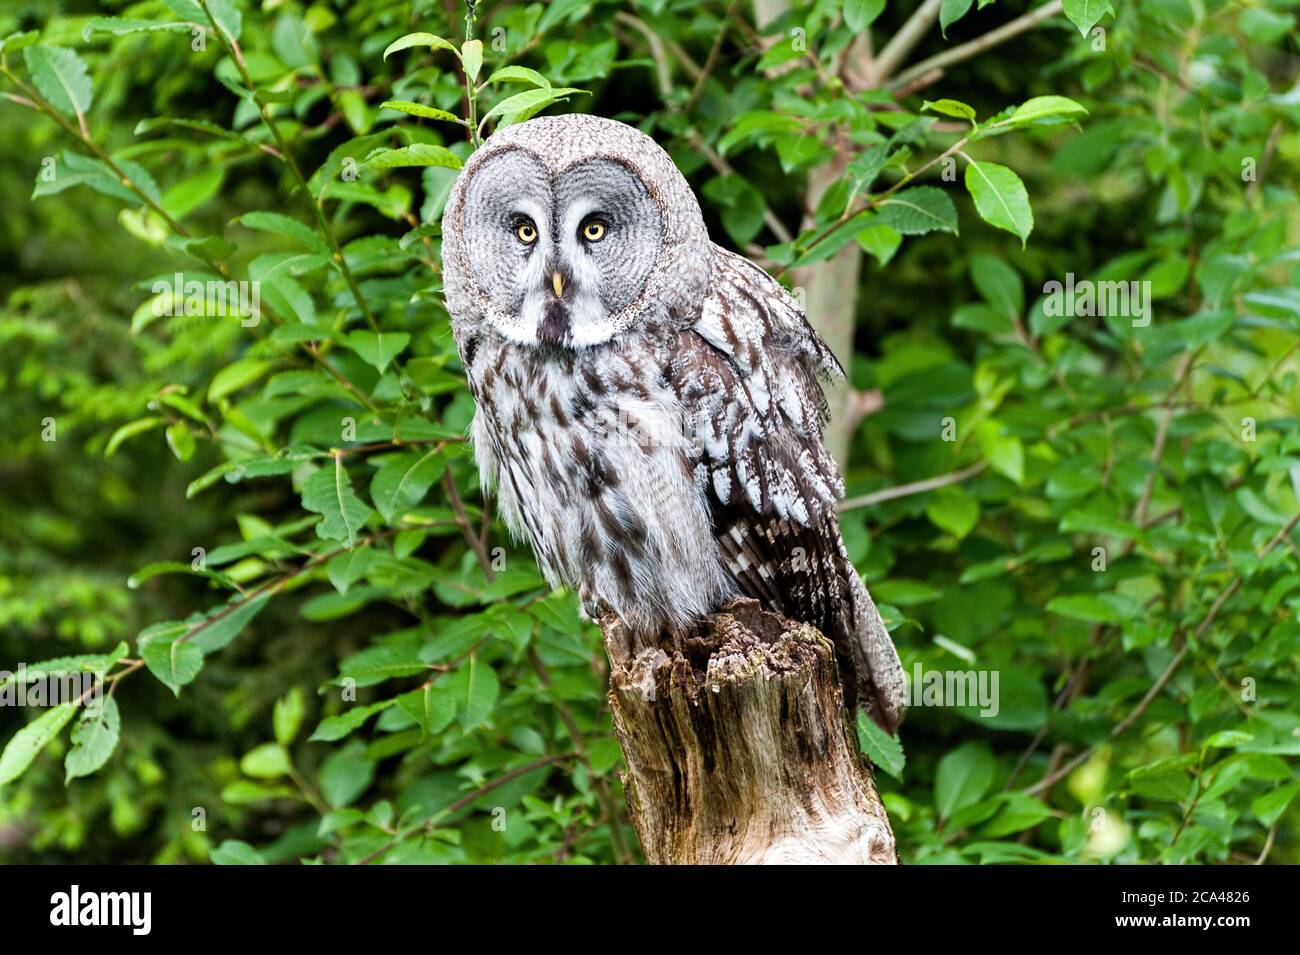 The great grey owl or great gray owl (Strix nebulosa) is a very large owl. Stock Photo